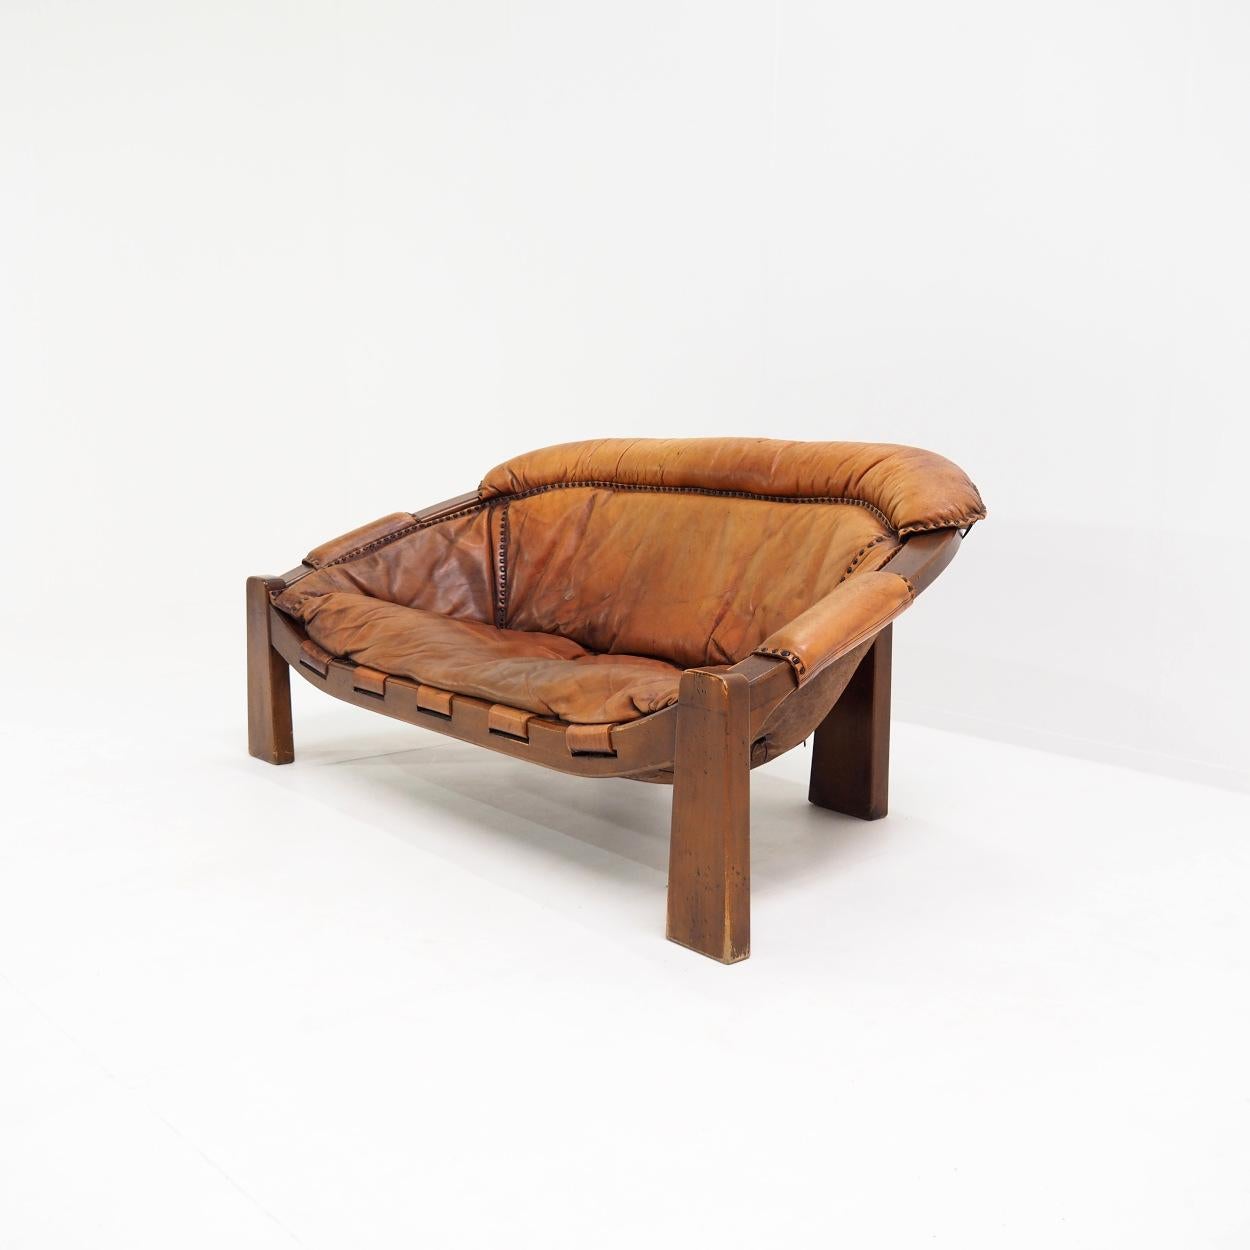 Beautiful two-seater sofa in the Brazilian brutalist style from the 1970s.

The sofa was designed by the Italian designer Luciano Frigerio and made and assembled in his studio.

The seat has an incredibly beautiful patinated leather with wear and